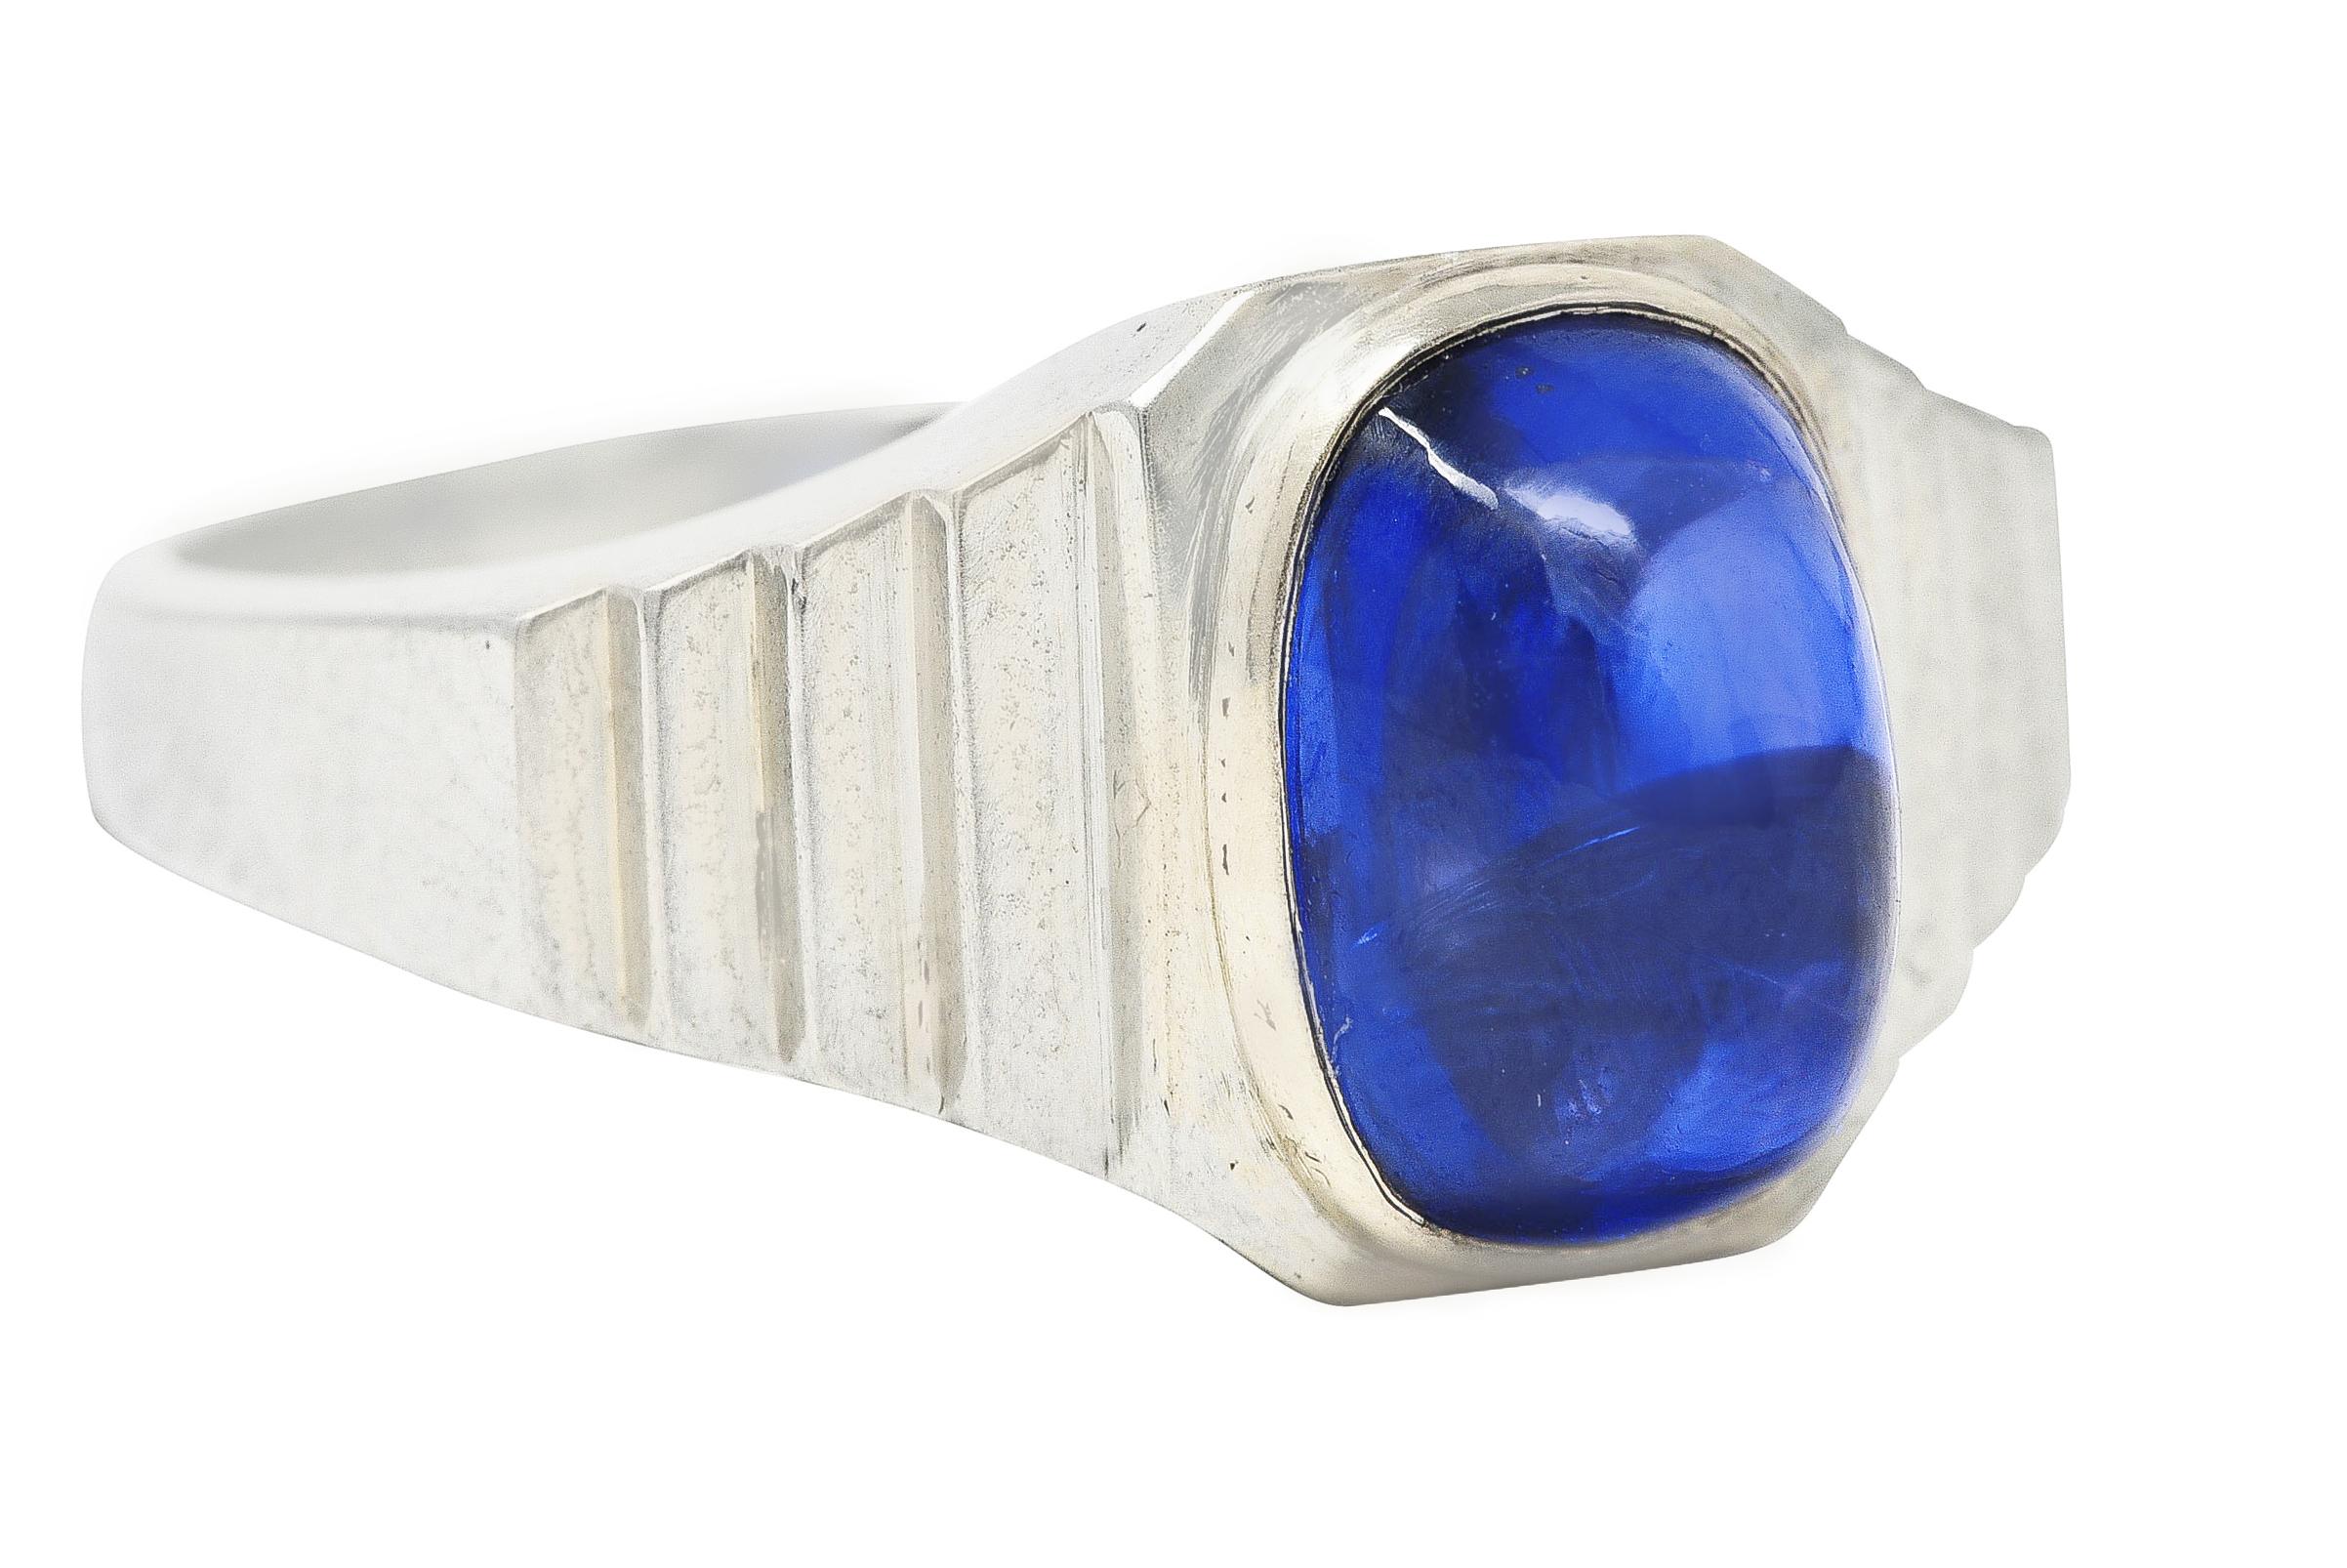 Band ring centers a highly domed sapphire cushion cabochon weighing approximately 5.15 carats. Transparent and violetish blue in color - medium saturation. Bezel set in a polished white gold surround and flanked by faceted stepped shoulders. Stamped